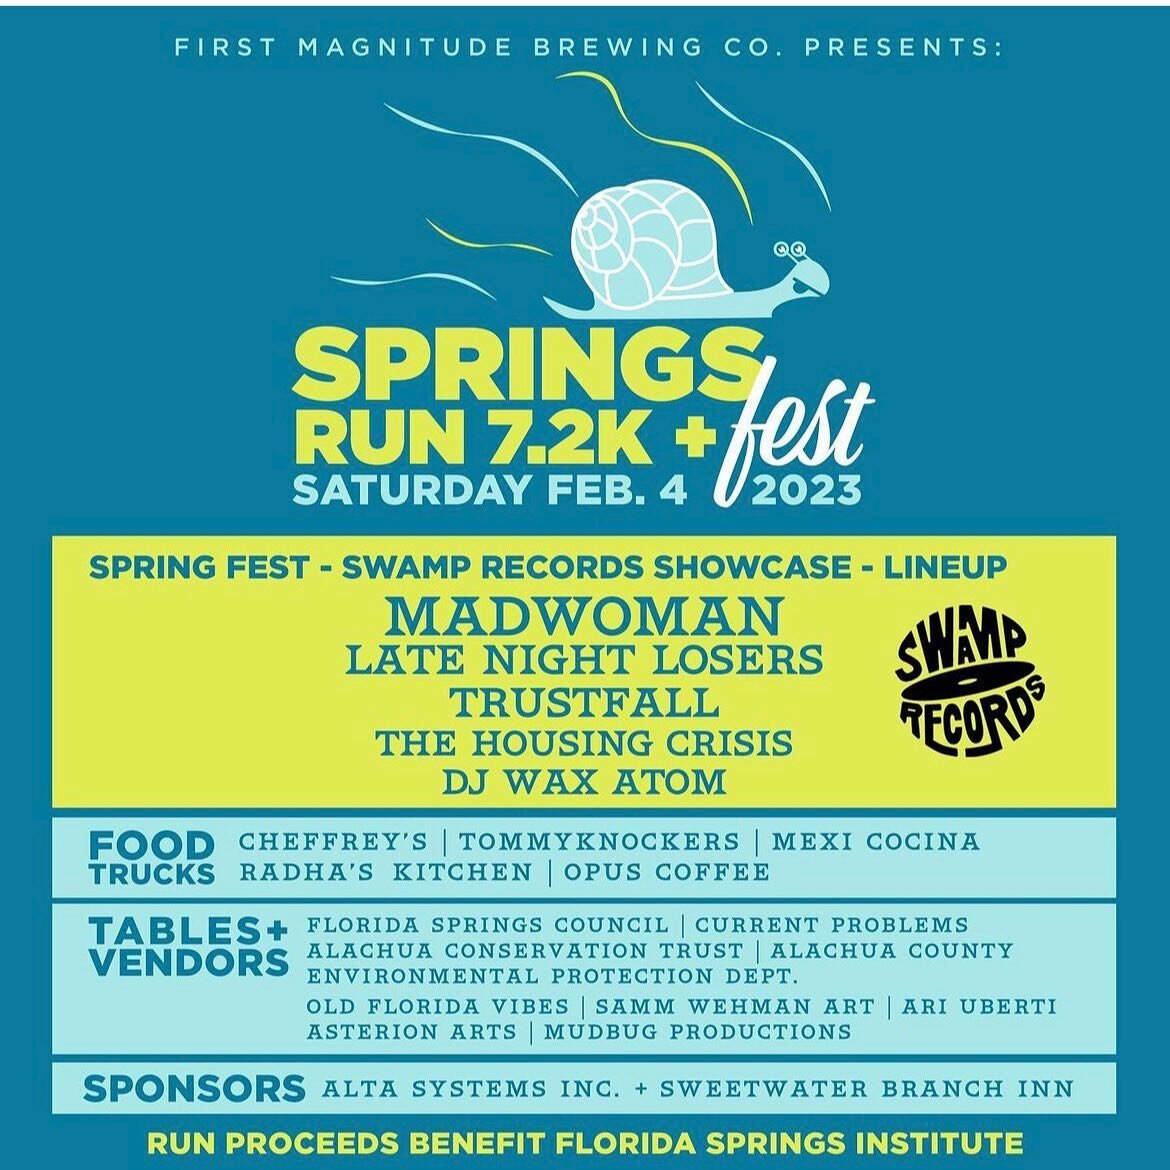 Don&rsquo;t miss Springs Run this Sat. 2/4 for a scenic 7.2k run starting from @fmbrewing , through @depot.park then down the Gainesville-Hawthorne Trail. Don&rsquo;t want to do the full 7.2k? There&rsquo;s a fun run option too, just around @depot.pa